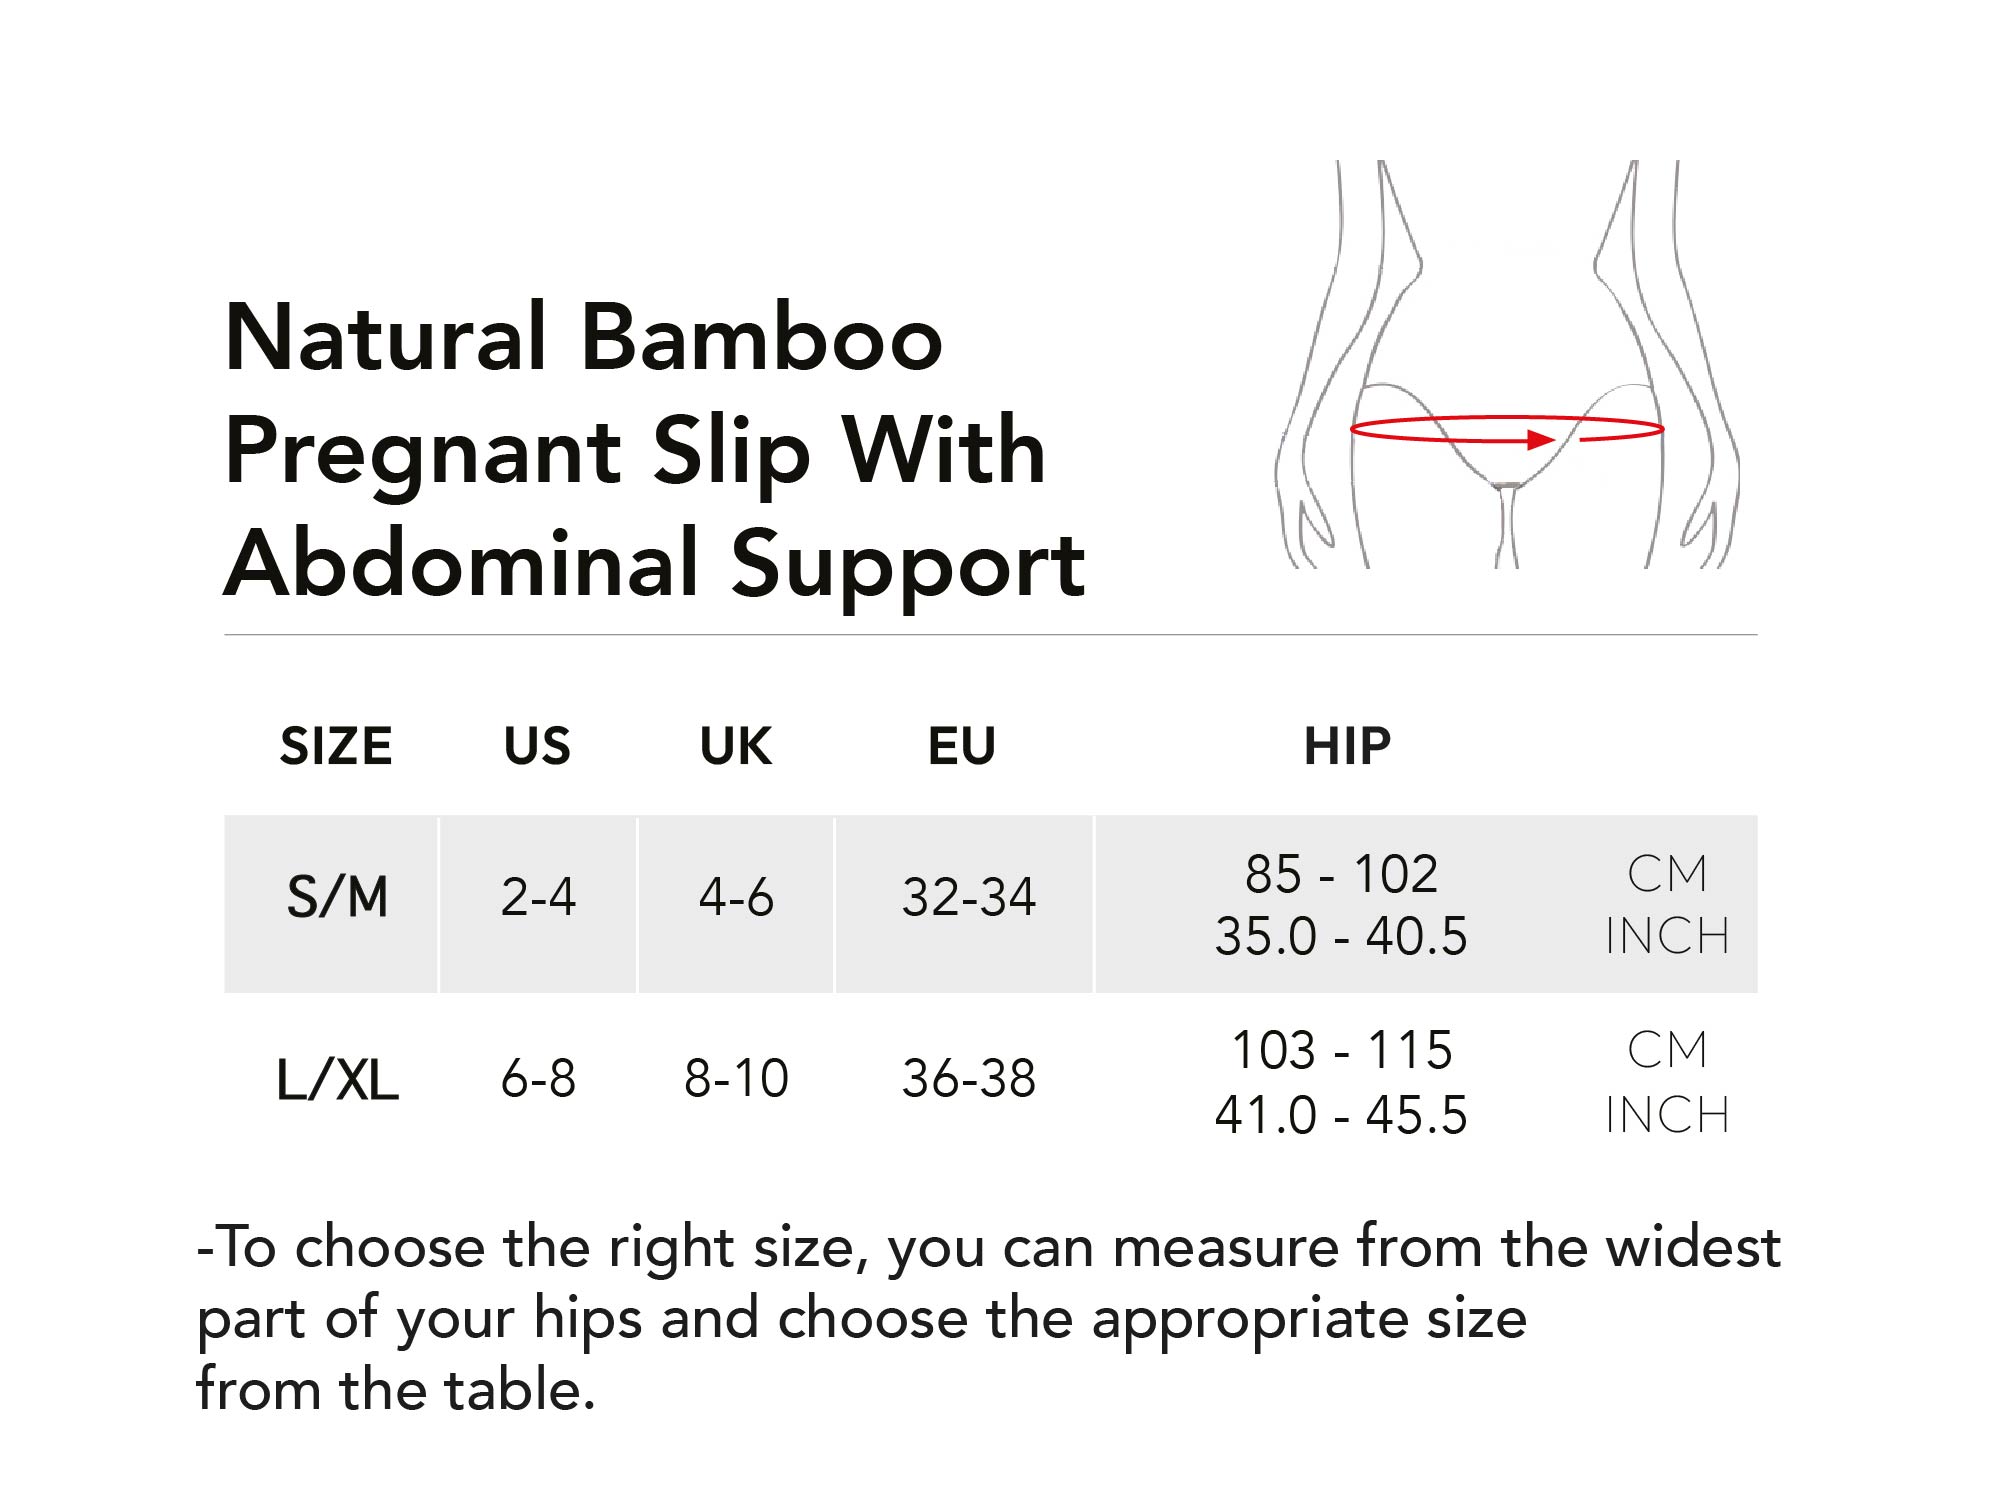 natural_bamboo_pregnant_slip_with_abdominal_support_.jpg (193 KB)